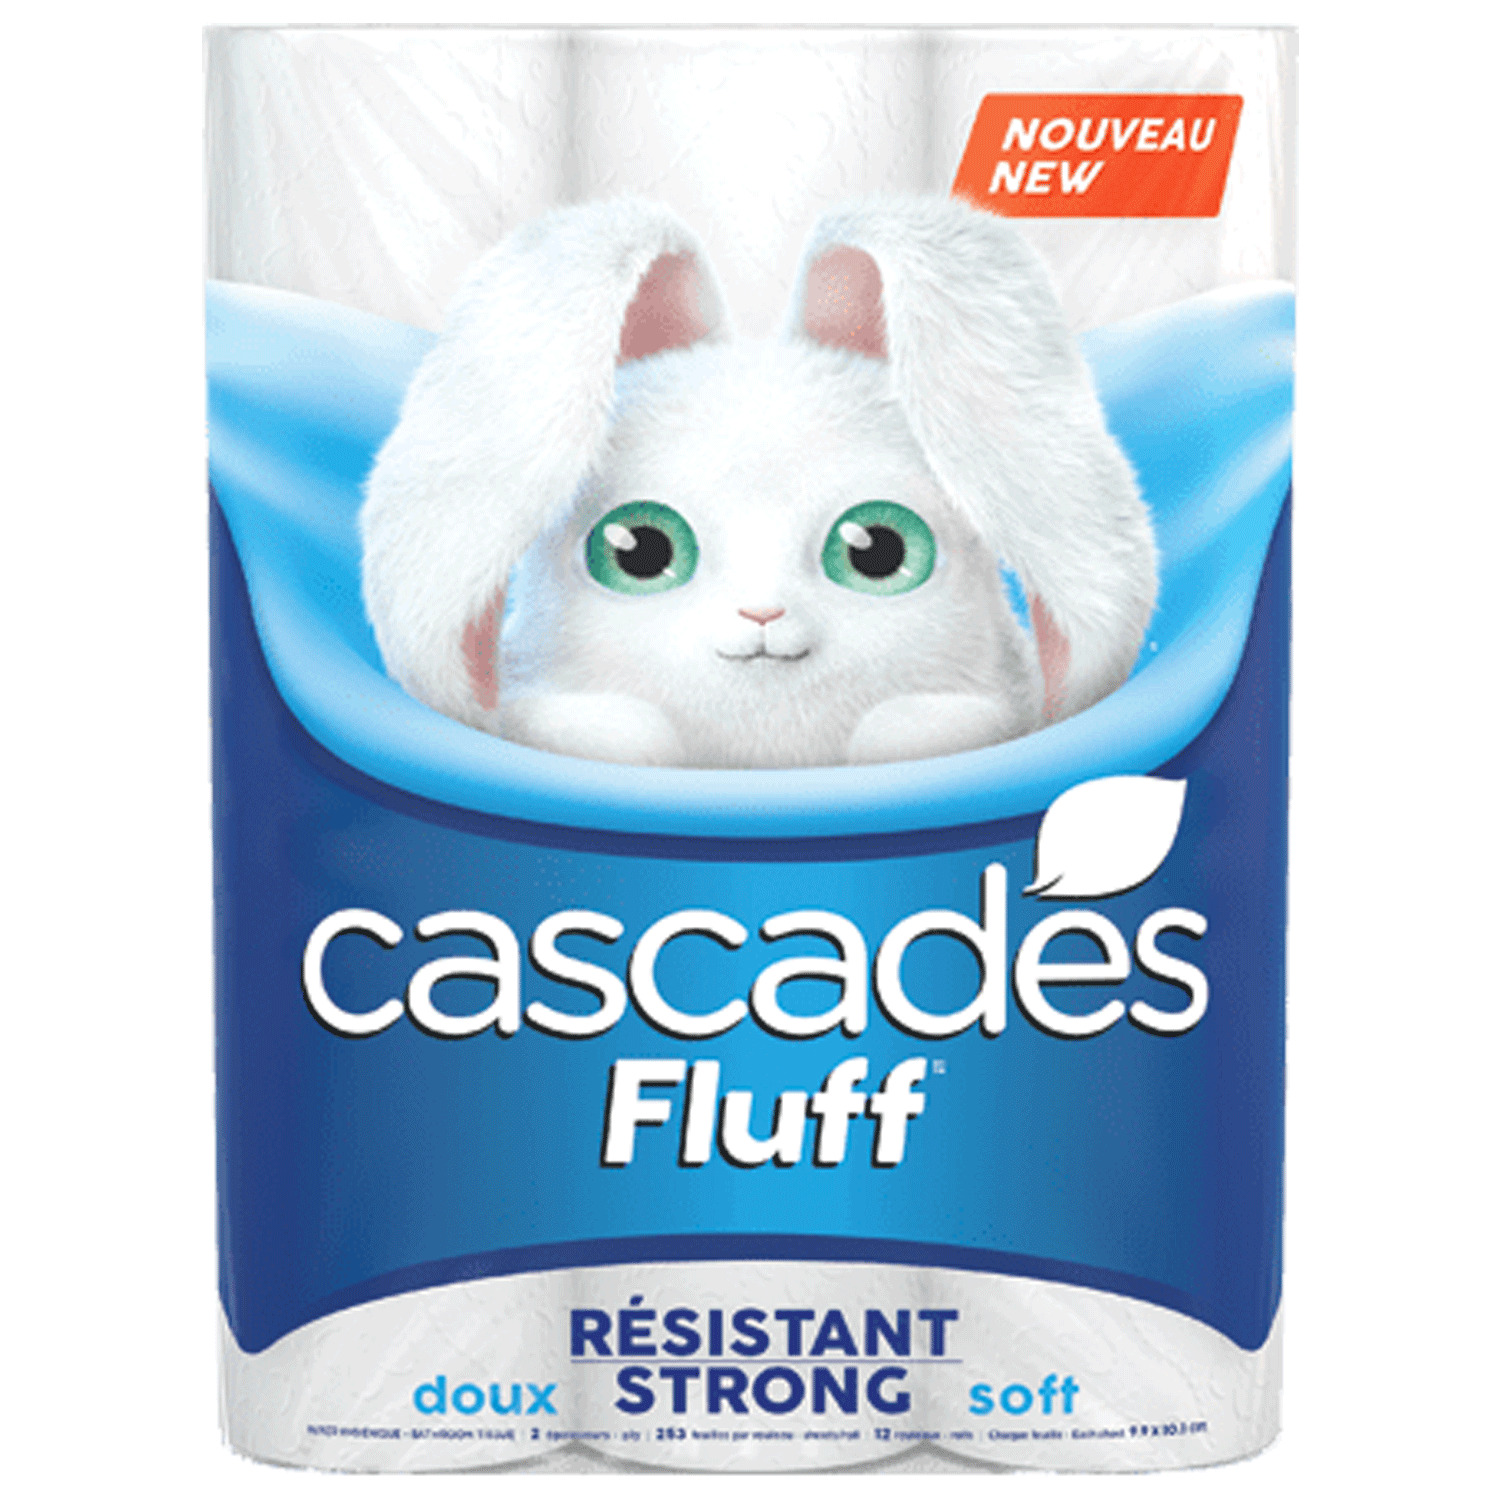 Cascades - Fluff toilet paper, 2-ply Strong soft, pk. of 15